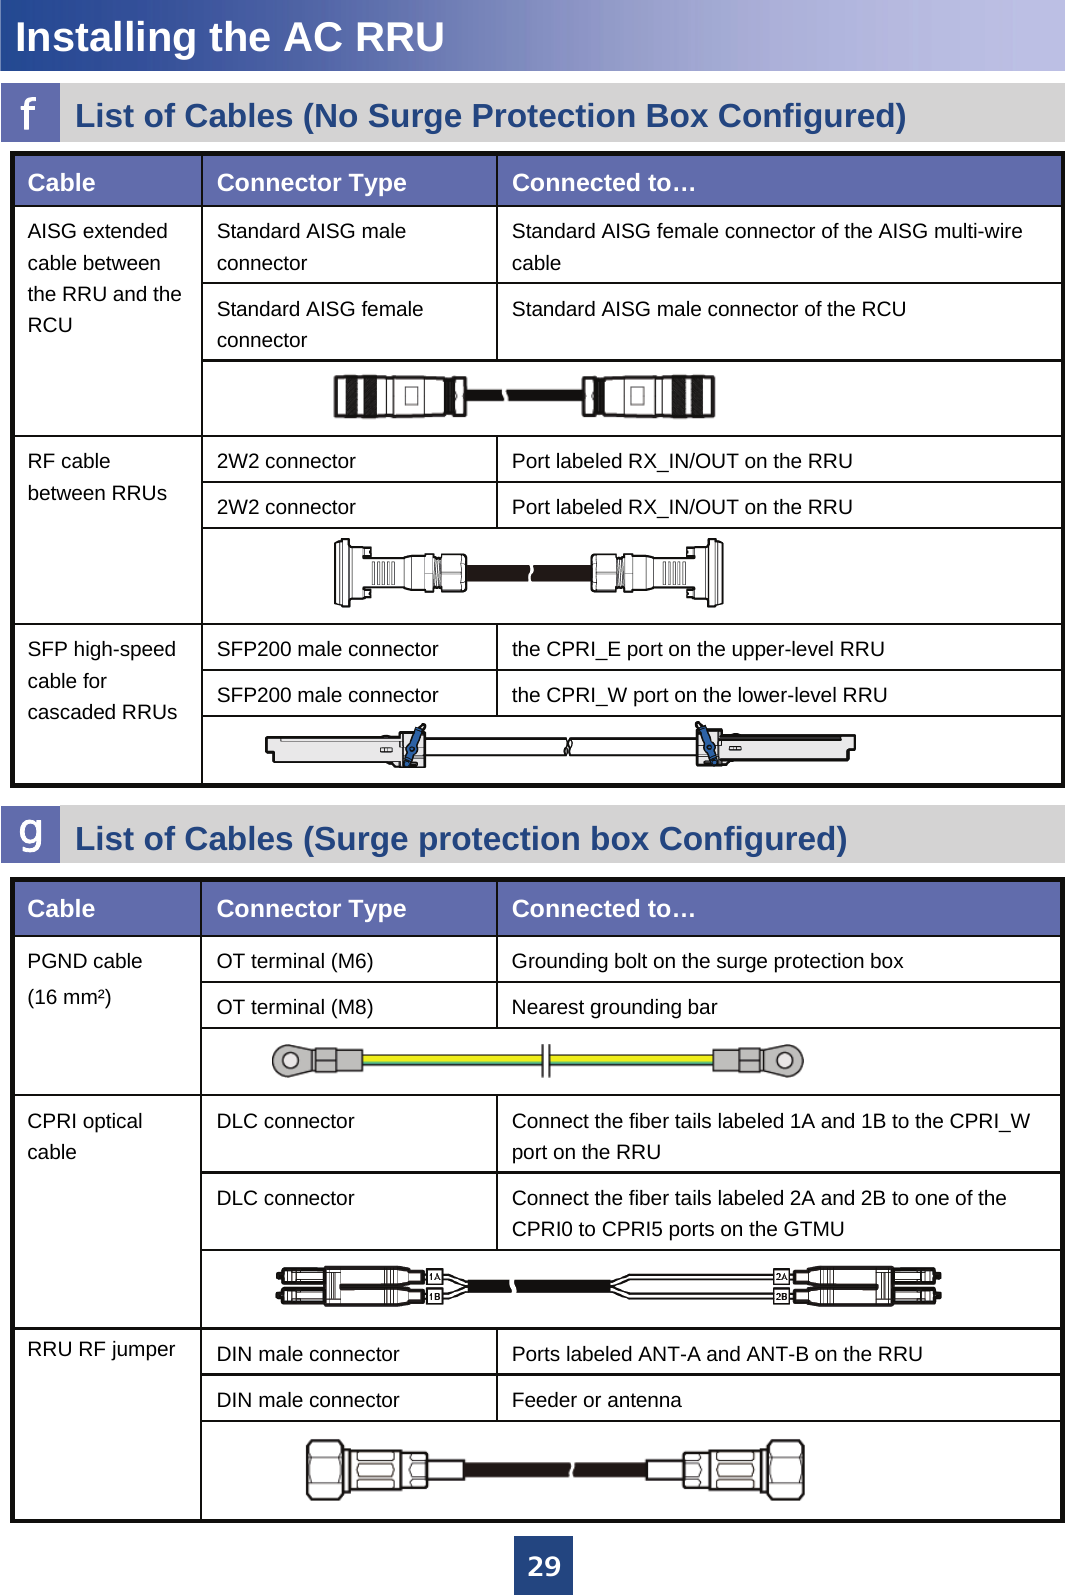 29List of Cables (No Surge Protection Box Configured)fInstalling the AC RRUthe CPRI_E port on the upper-level RRUSFP200 male connectorSFP high-speed cable for cascaded RRUs the CPRI_W port on the lower-level RRUSFP200 male connectorStandard AISG female connector of the AISG multi-wire cableStandard AISG male connectorAISG extended cable between the RRU and the RCU Standard AISG male connector of the RCUStandard AISG female connectorPort labeled RX_IN/OUT on the RRU2W2 connectorRF cable between RRUs Port labeled RX_IN/OUT on the RRU2W2 connectorConnected to…Connector TypeCableList of Cables (Surge protection box Configured)gConnect the fiber tails labeled 2A and 2B to one of the CPRI0 to CPRI5 ports on the GTMUDLC connectorConnect the fiber tails labeled 1A and 1B to the CPRI_W port on the RRUDLC connectorCPRI optical cableConnected to…Connector TypeCableFeeder or antennaDIN male connectorPorts labeled ANT-A and ANT-B on the RRUDIN male connectorRRU RF jumperNearest grounding barOT terminal (M8)Grounding bolt on the surge protection boxOT terminal (M6)PGND cable(16 mm²)